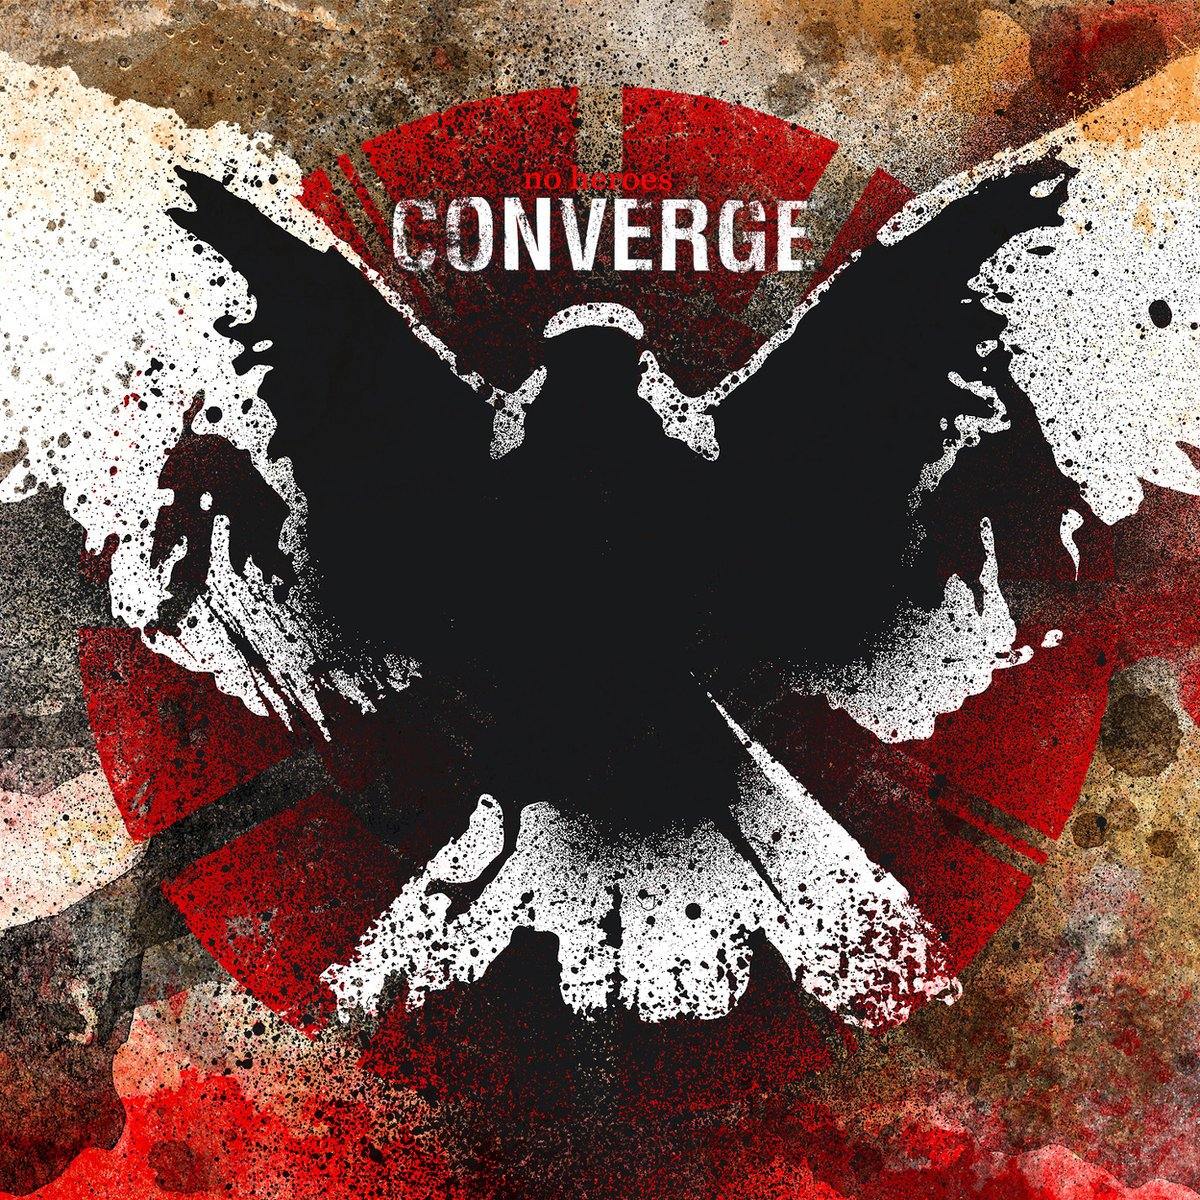 Buy – Converge "No Heroes" 12" – Band & Music Merch – Cold Cuts Merch